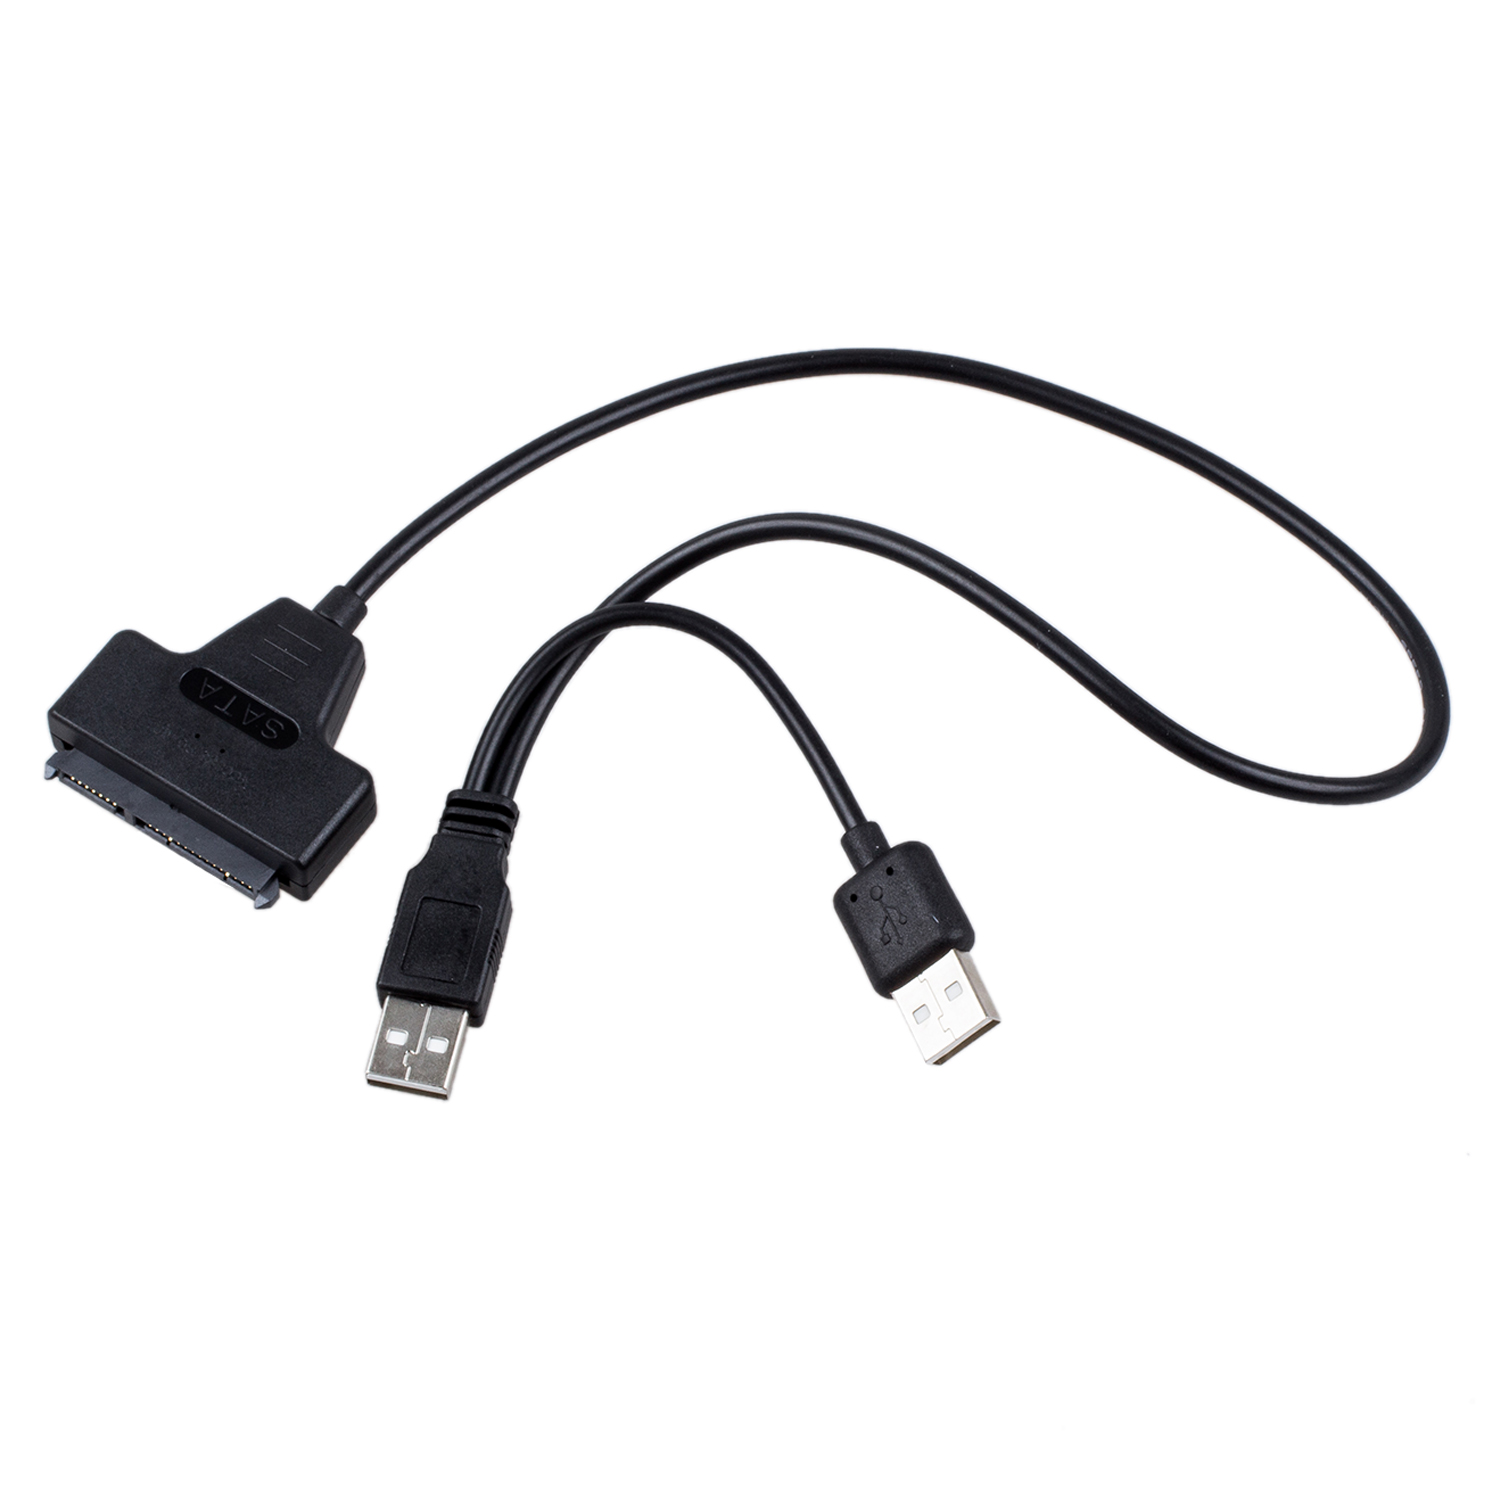 New USB 2.0 to SATA Serial ATA 15+7 22P Adapter Cable For 2.5